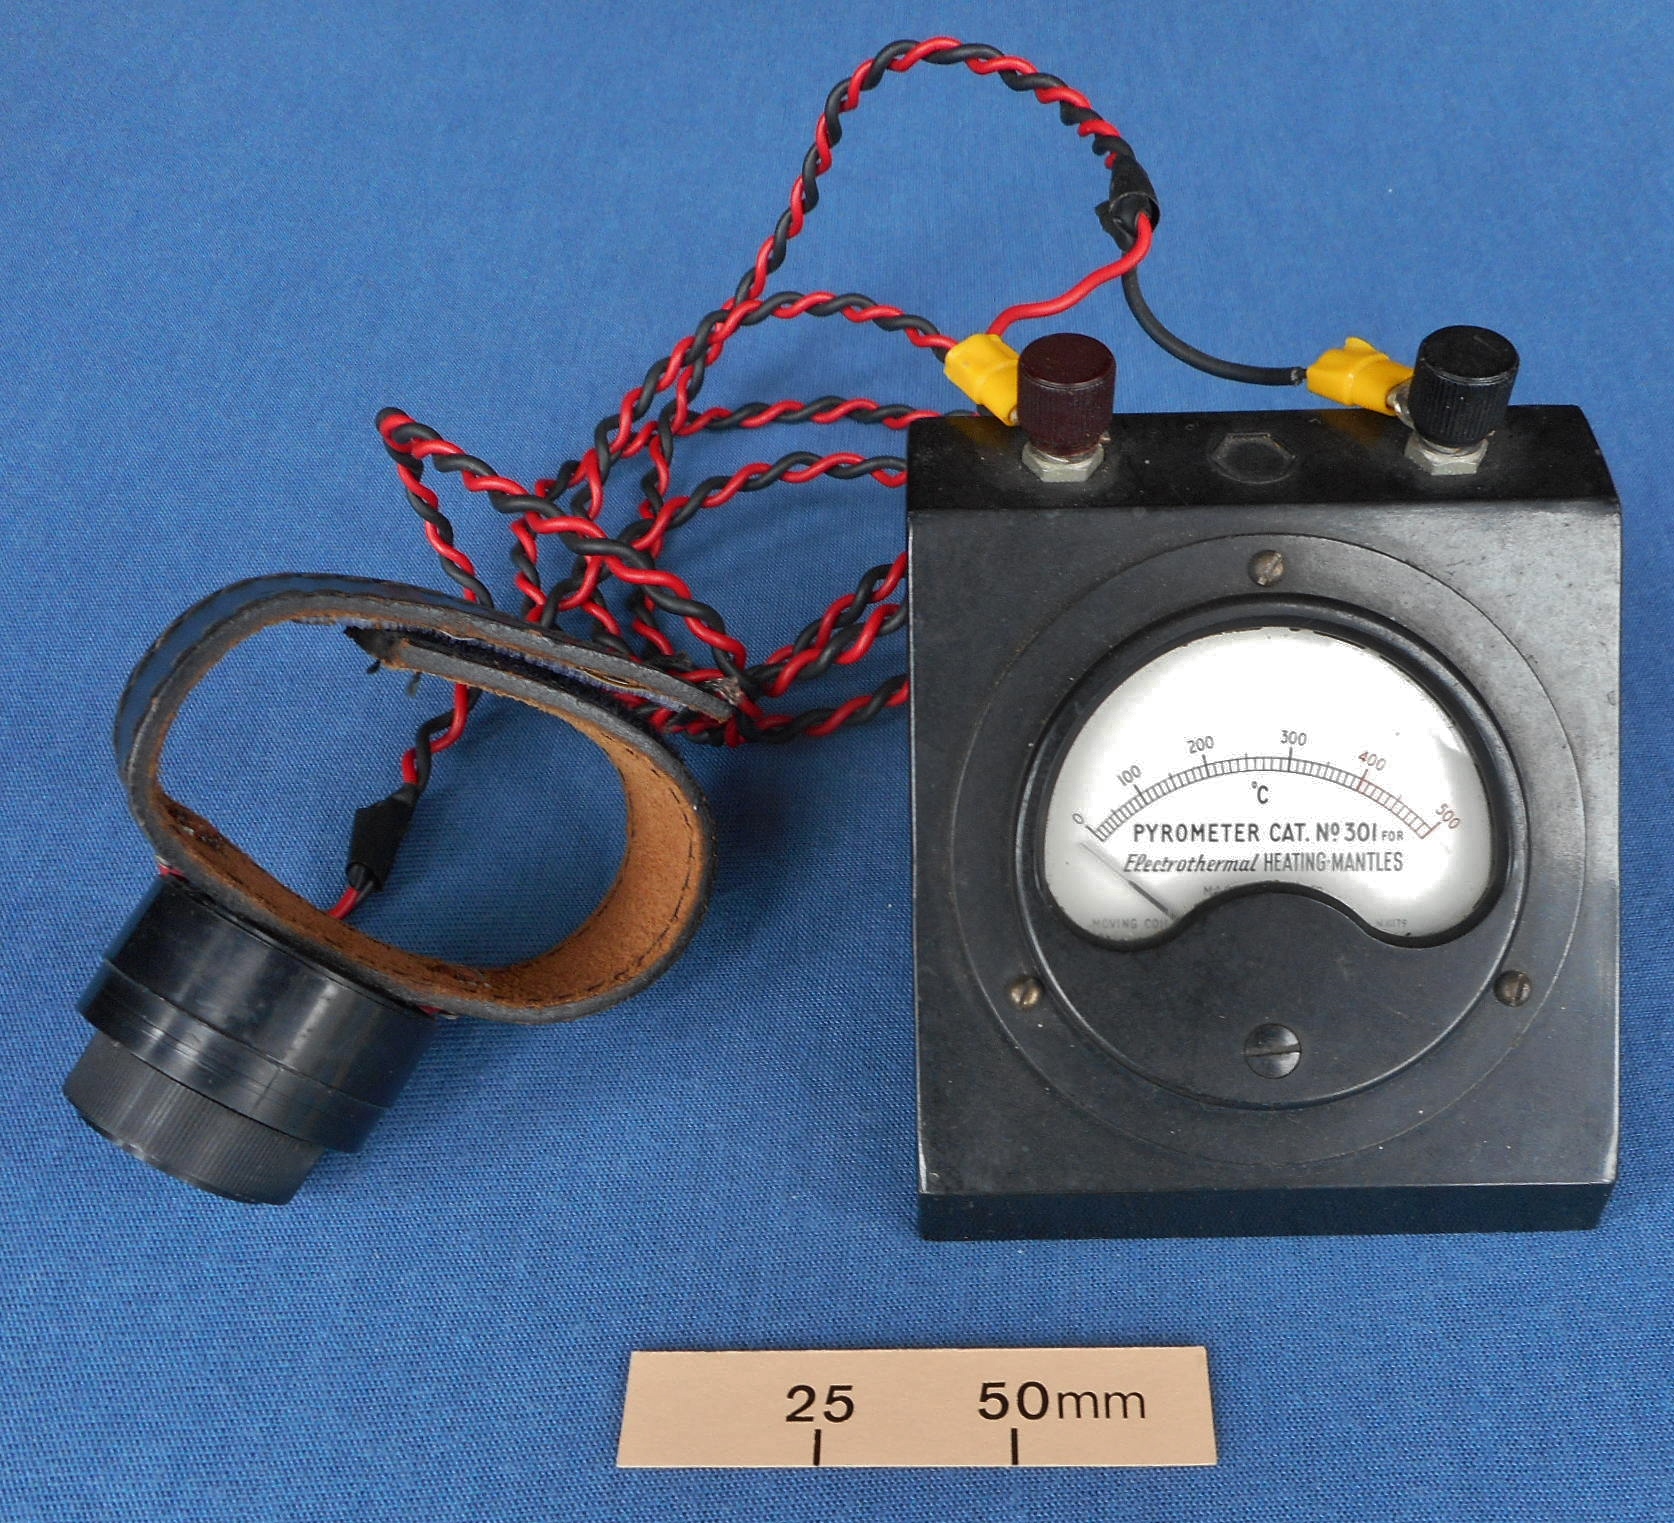 Pseudo-scientific detector used to identify a selected card